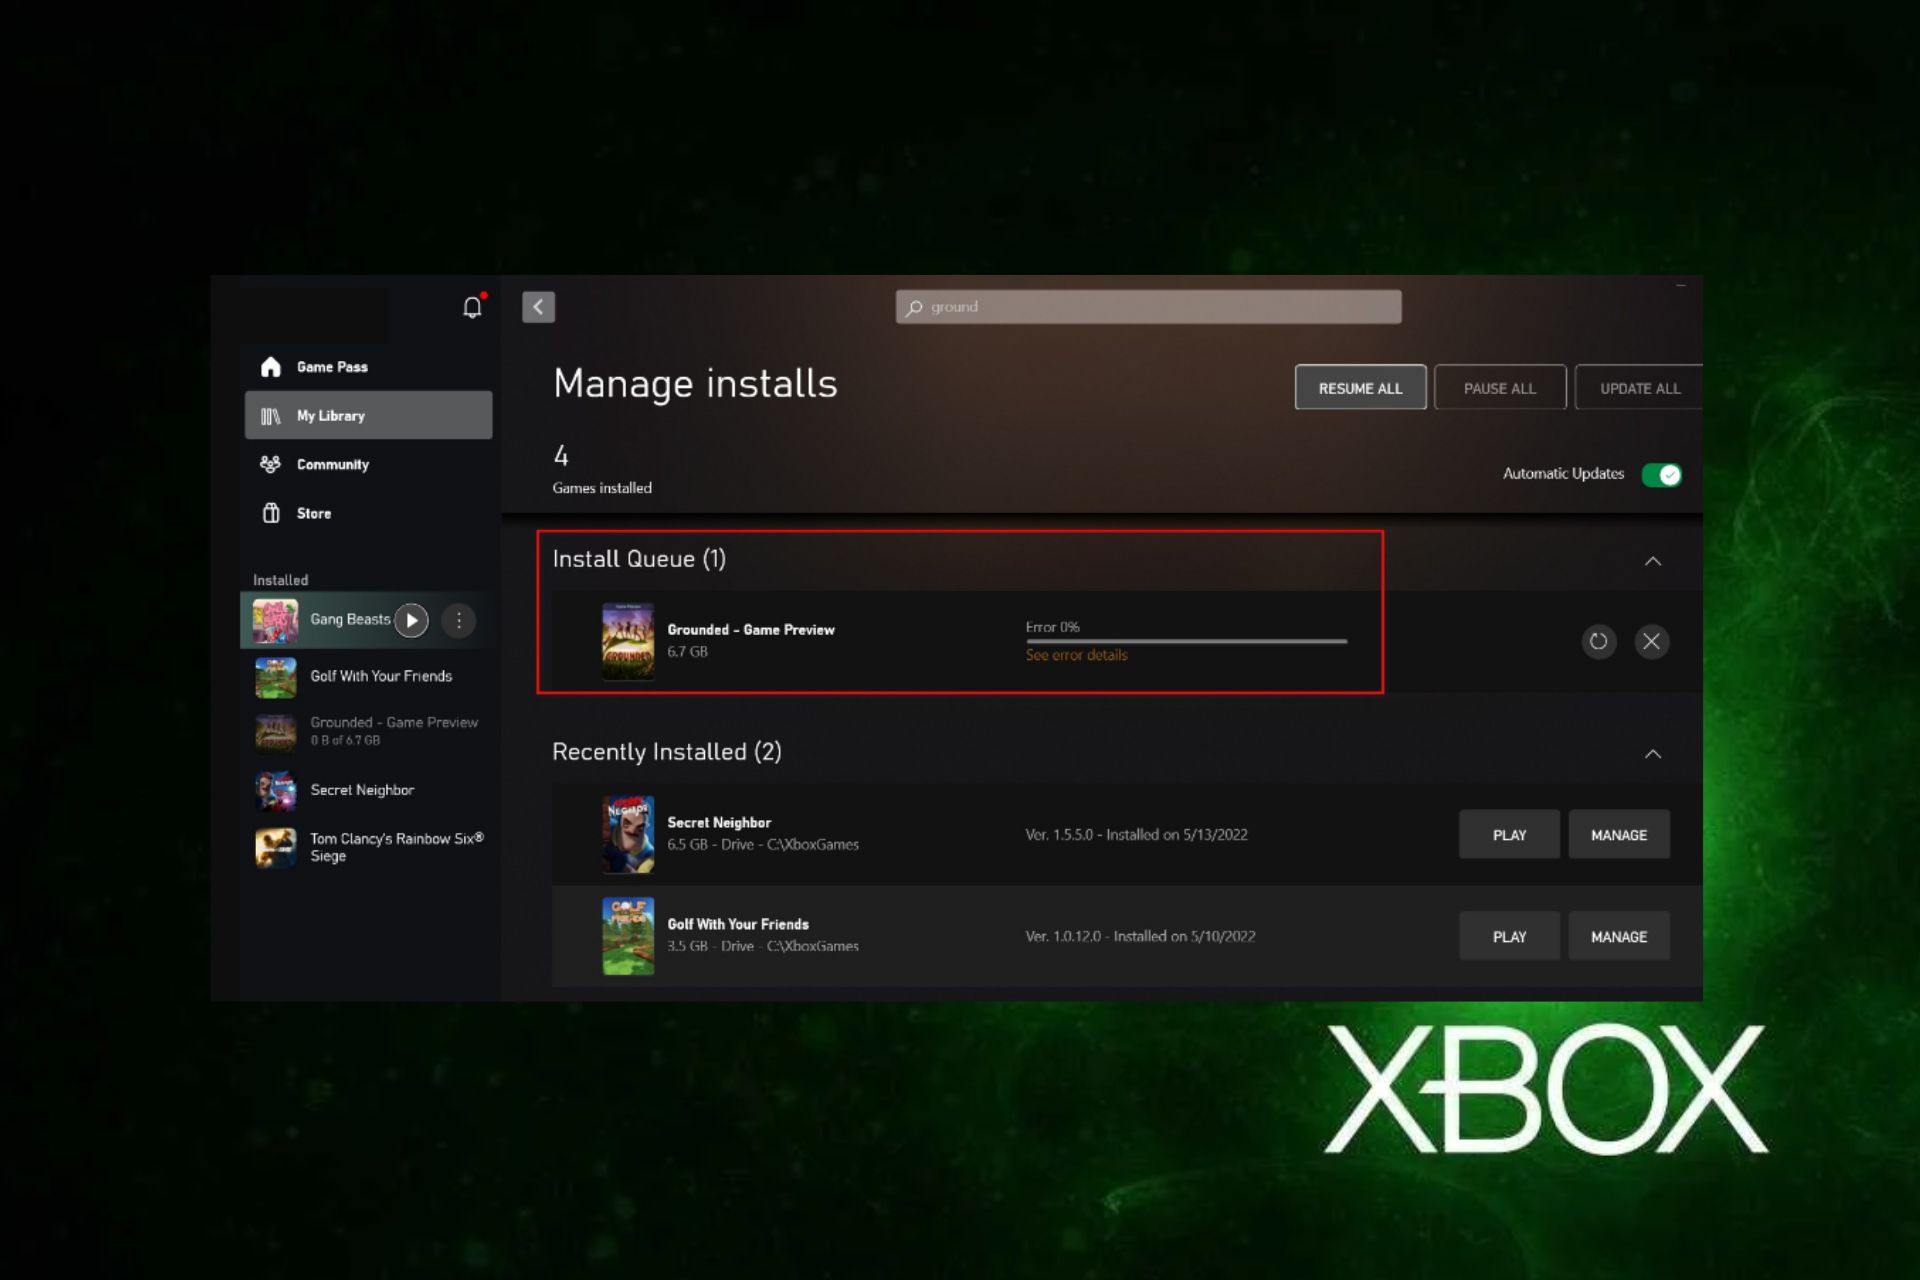 New Xbox Update Speeds Up Downloads While Games Are Suspended